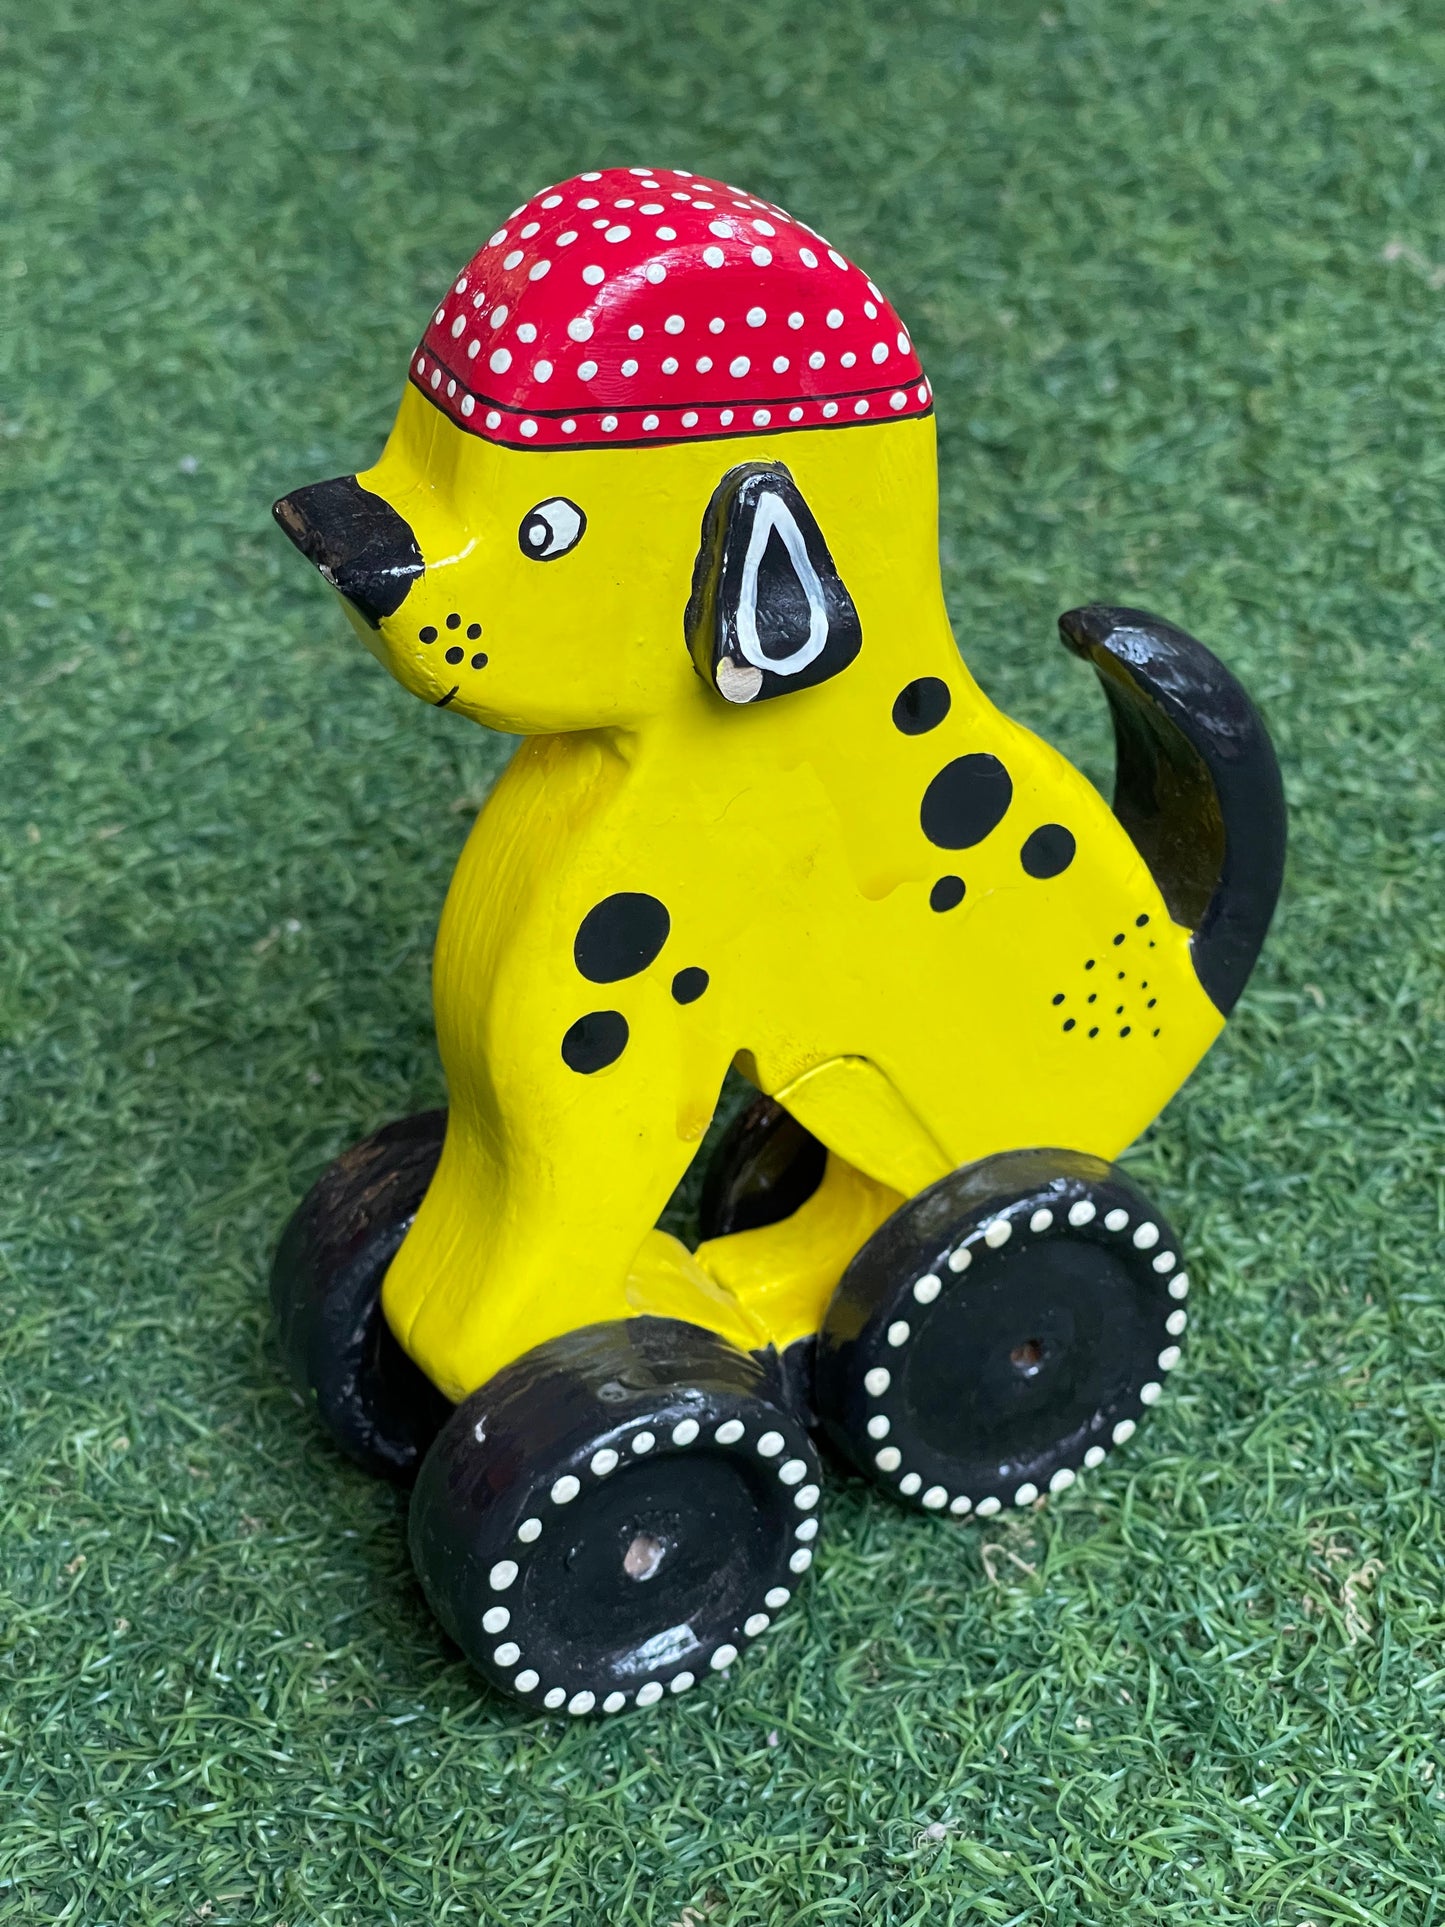 Dog on wheels - Wooden hand painted decorative toy